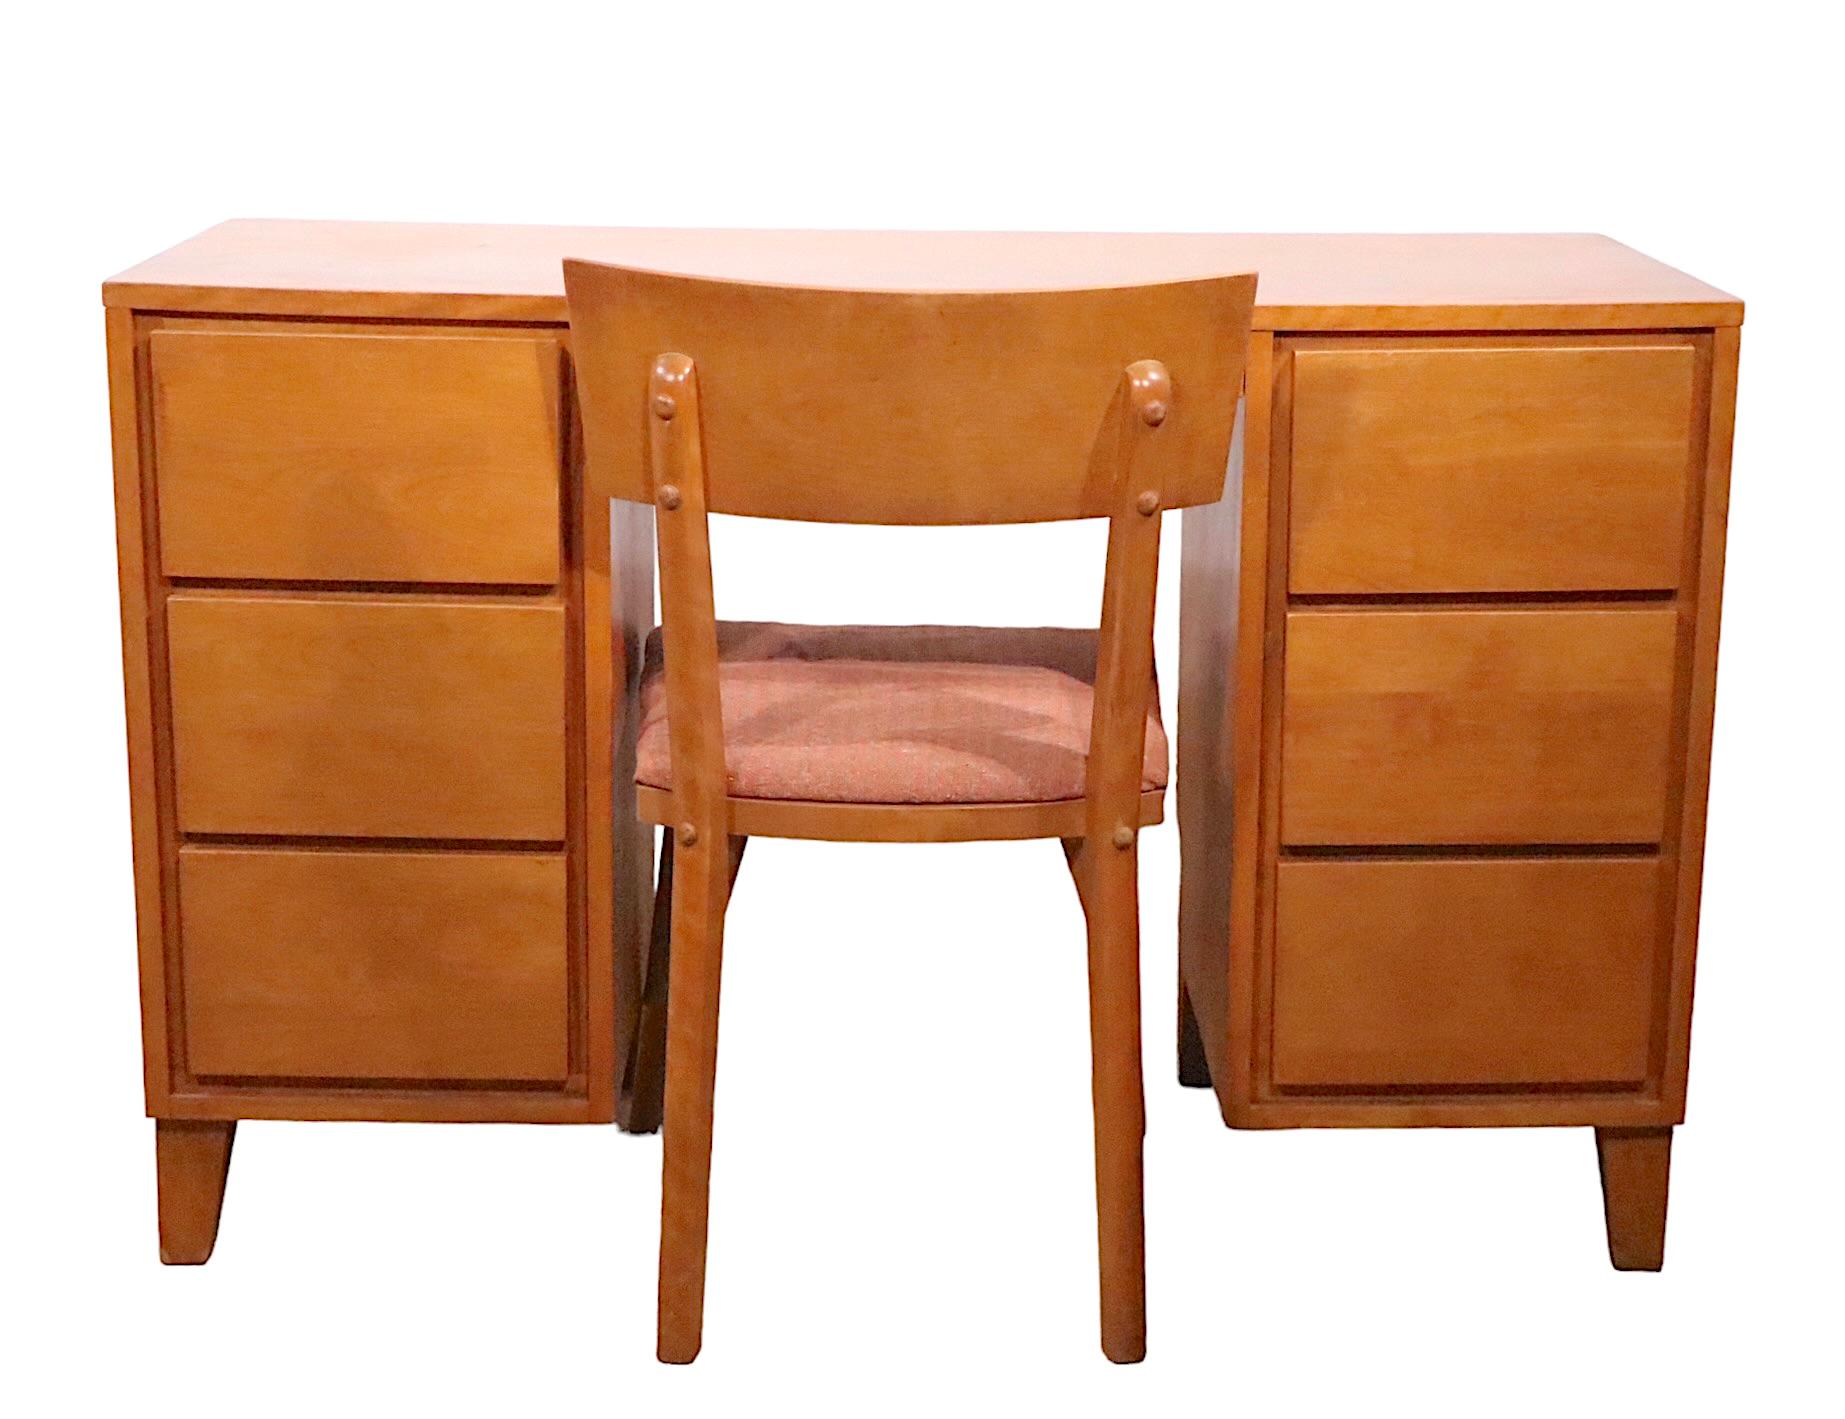 1950's Mid Century Desk and Chair Conant Ball  Modern Mates by Leslie Diamond   For Sale 6